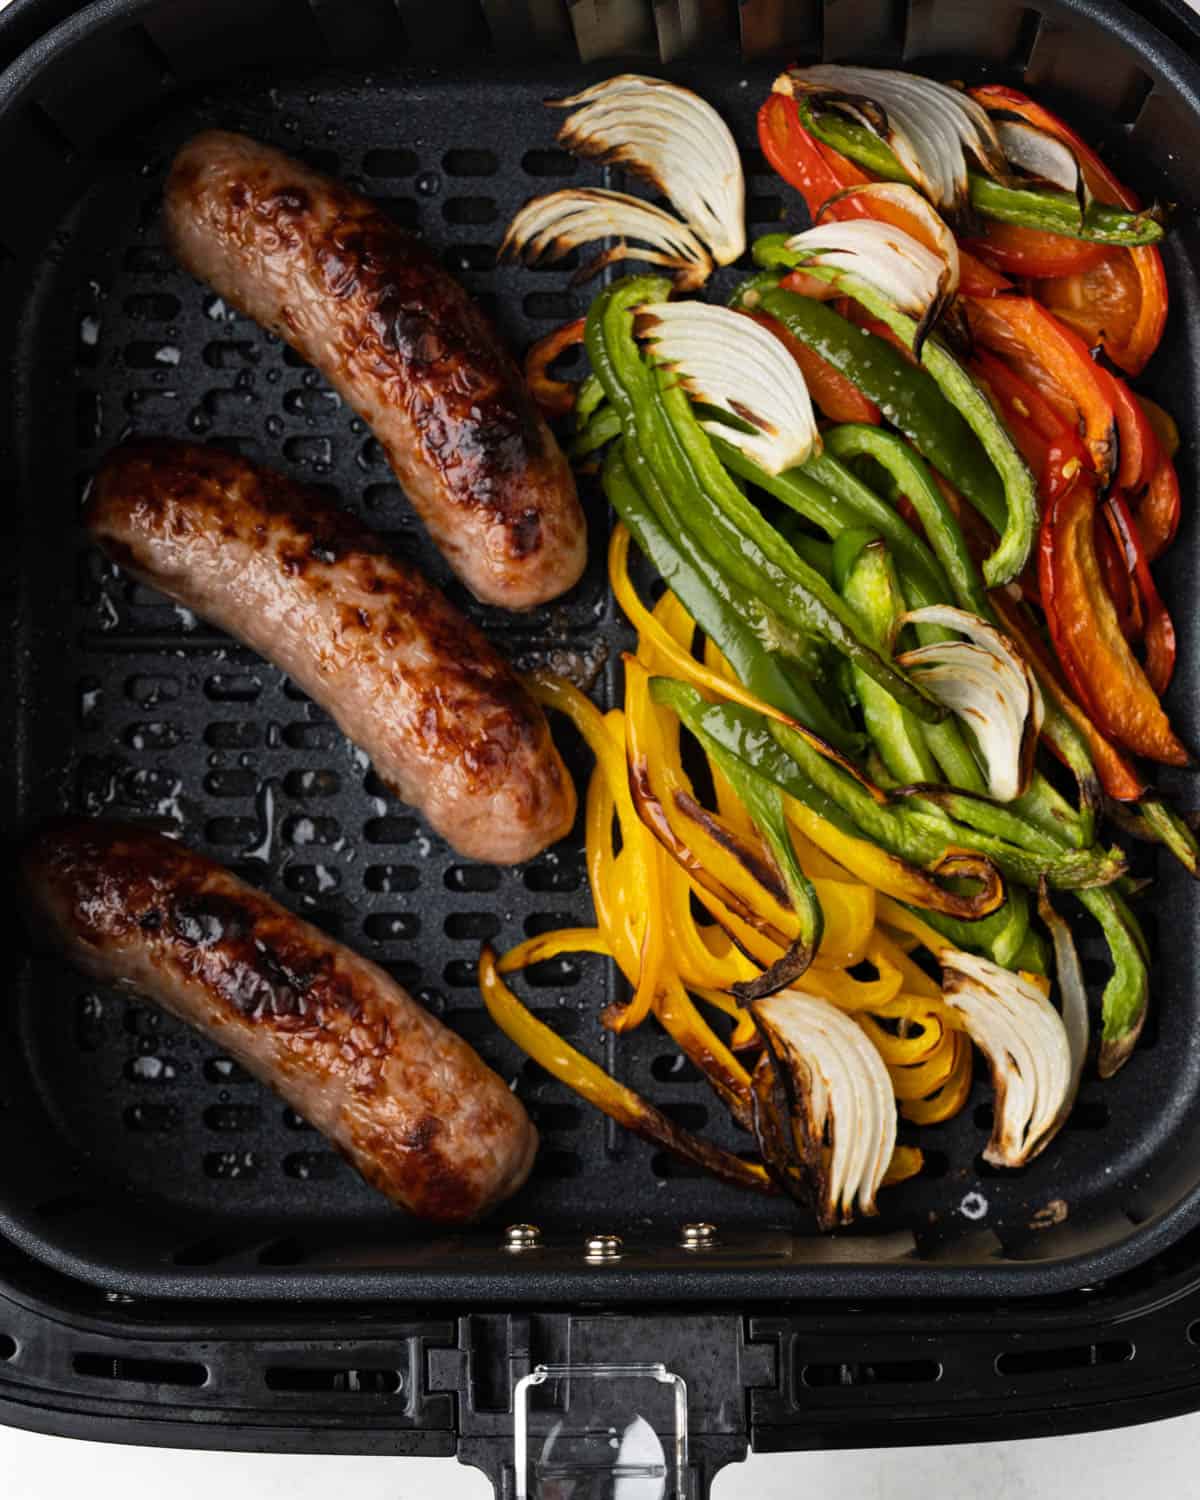 Air fried brats, onions and peppers in the air fryer basket